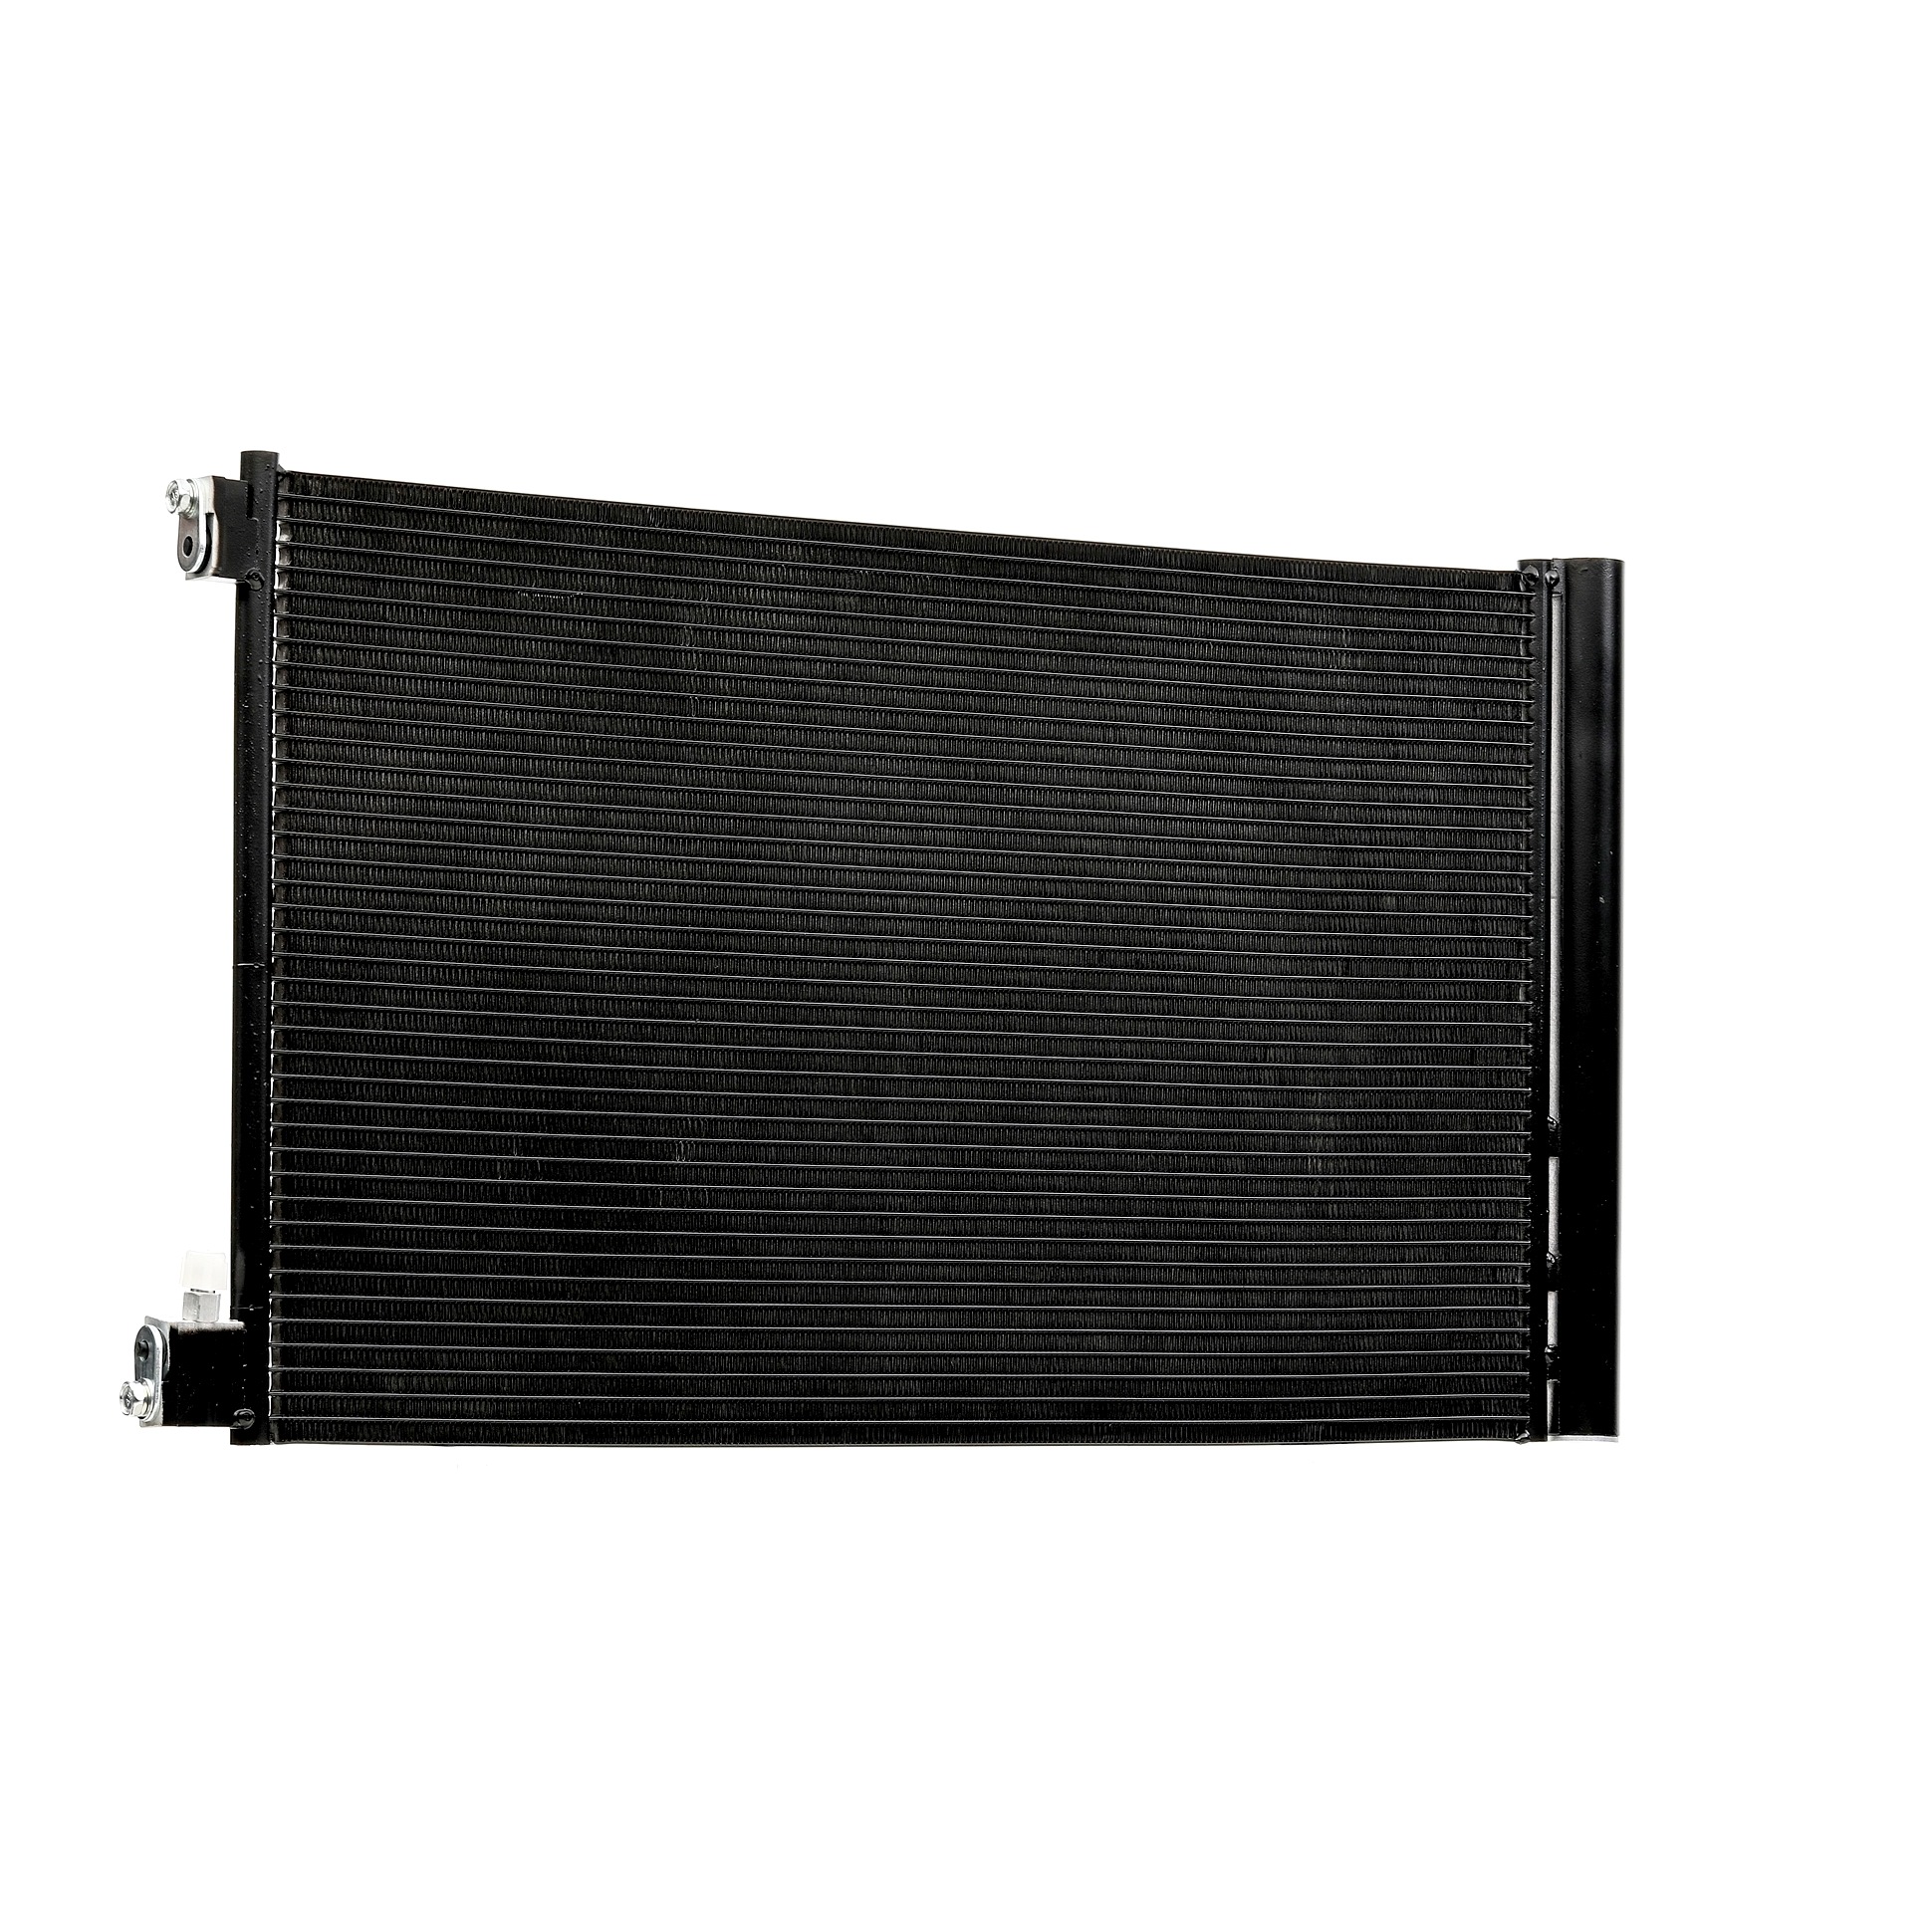 MAHLE ORIGINAL AC 552 000S Air conditioning condenser with dryer, 12mm, 11,3mm, 624, 635mm